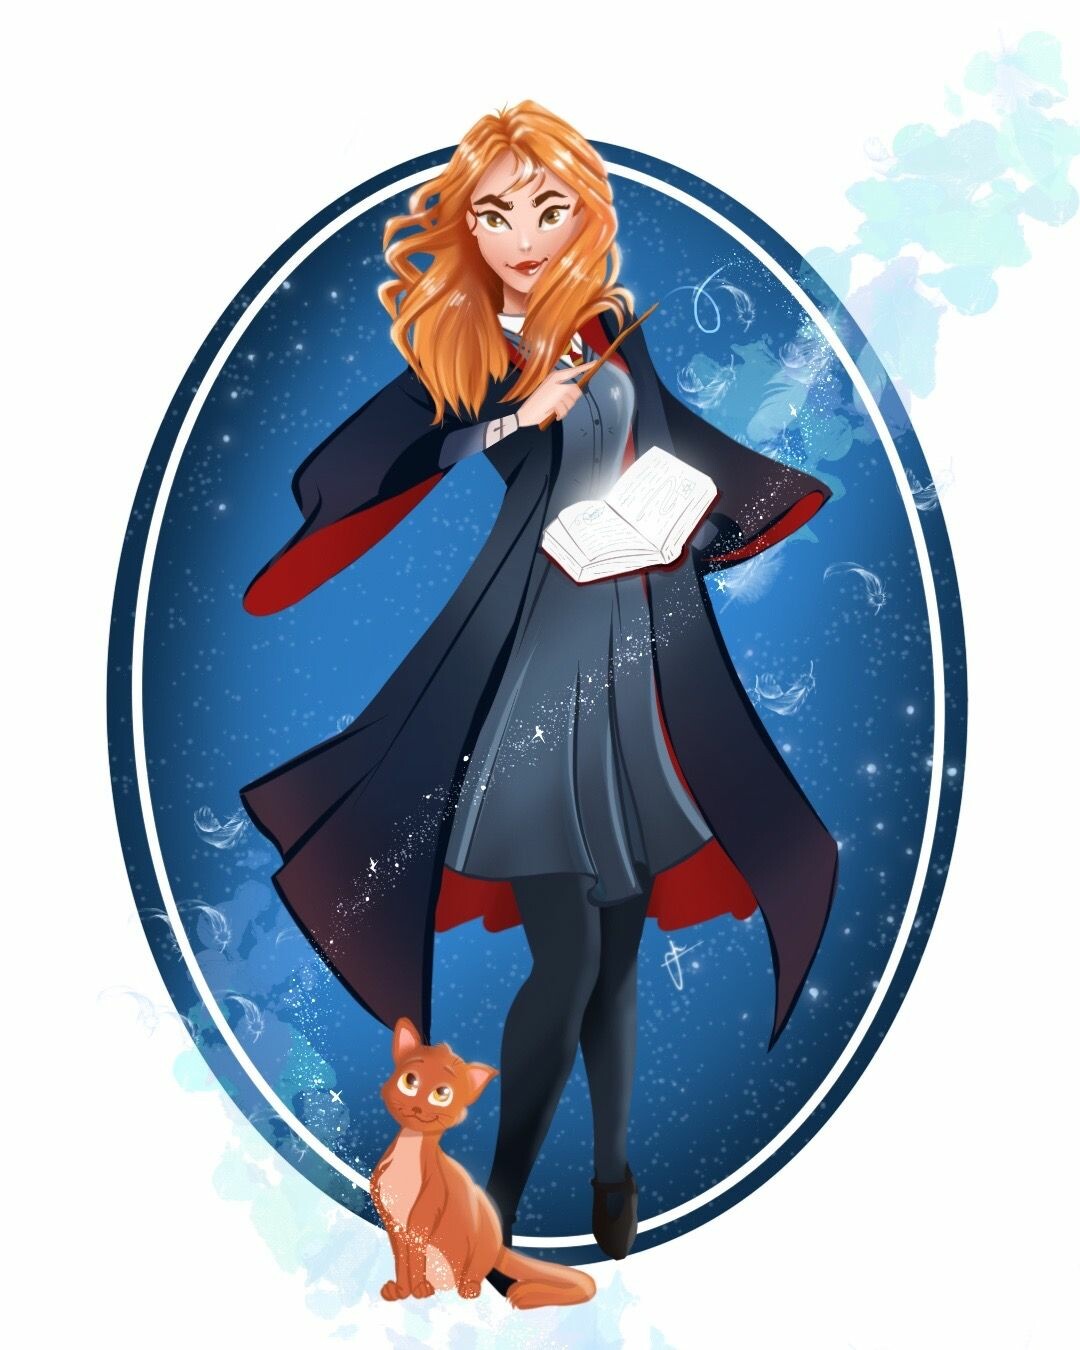 Hermione Granger, Book of Heroes and Villains Wiki